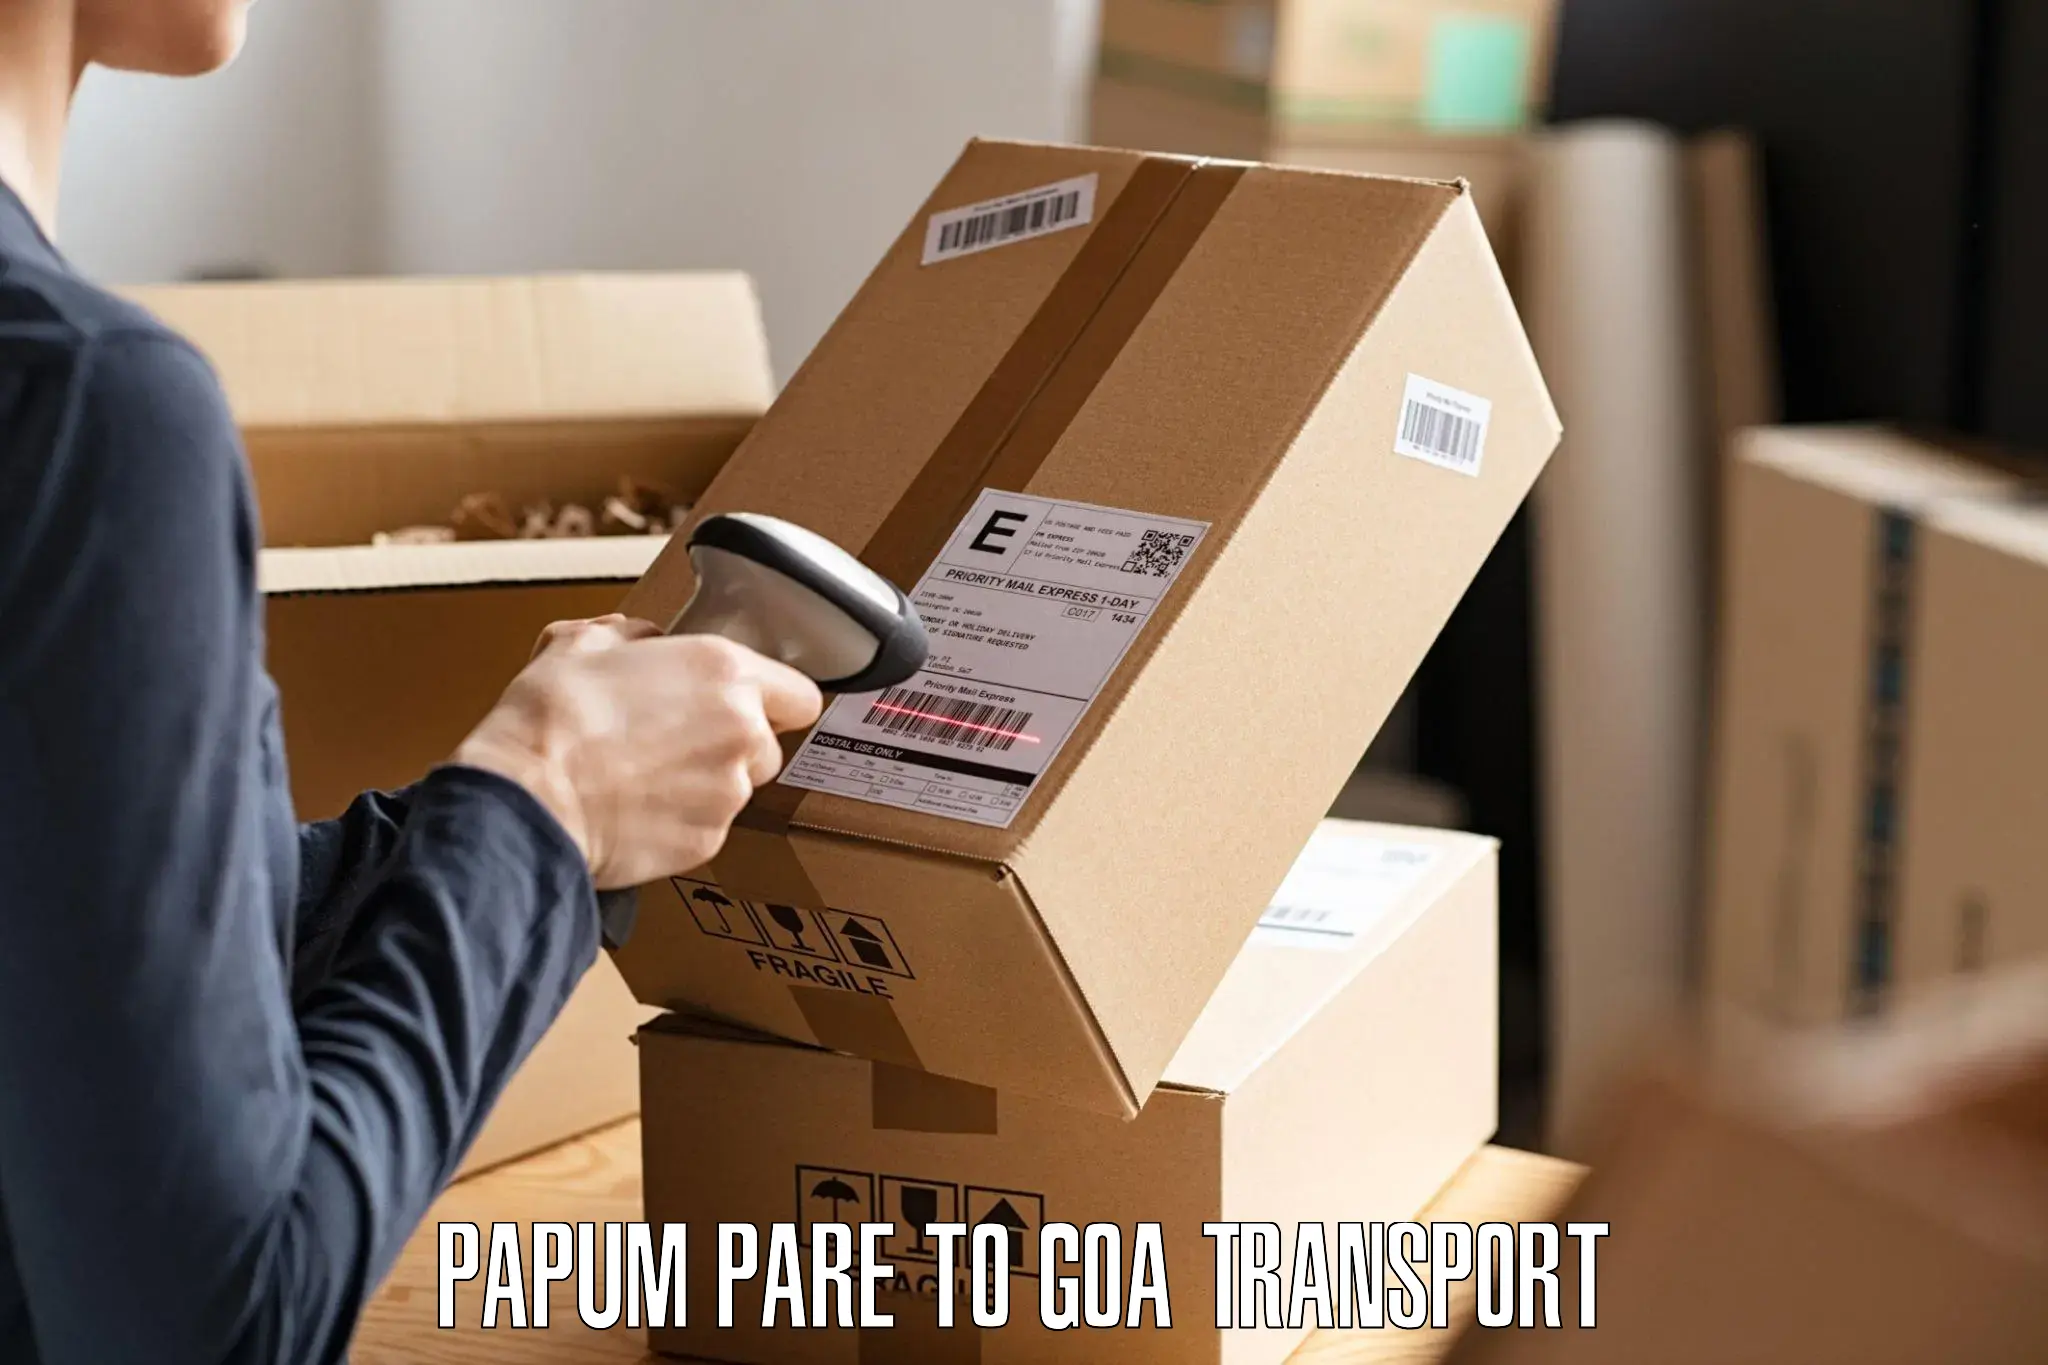 Daily transport service Papum Pare to IIT Goa